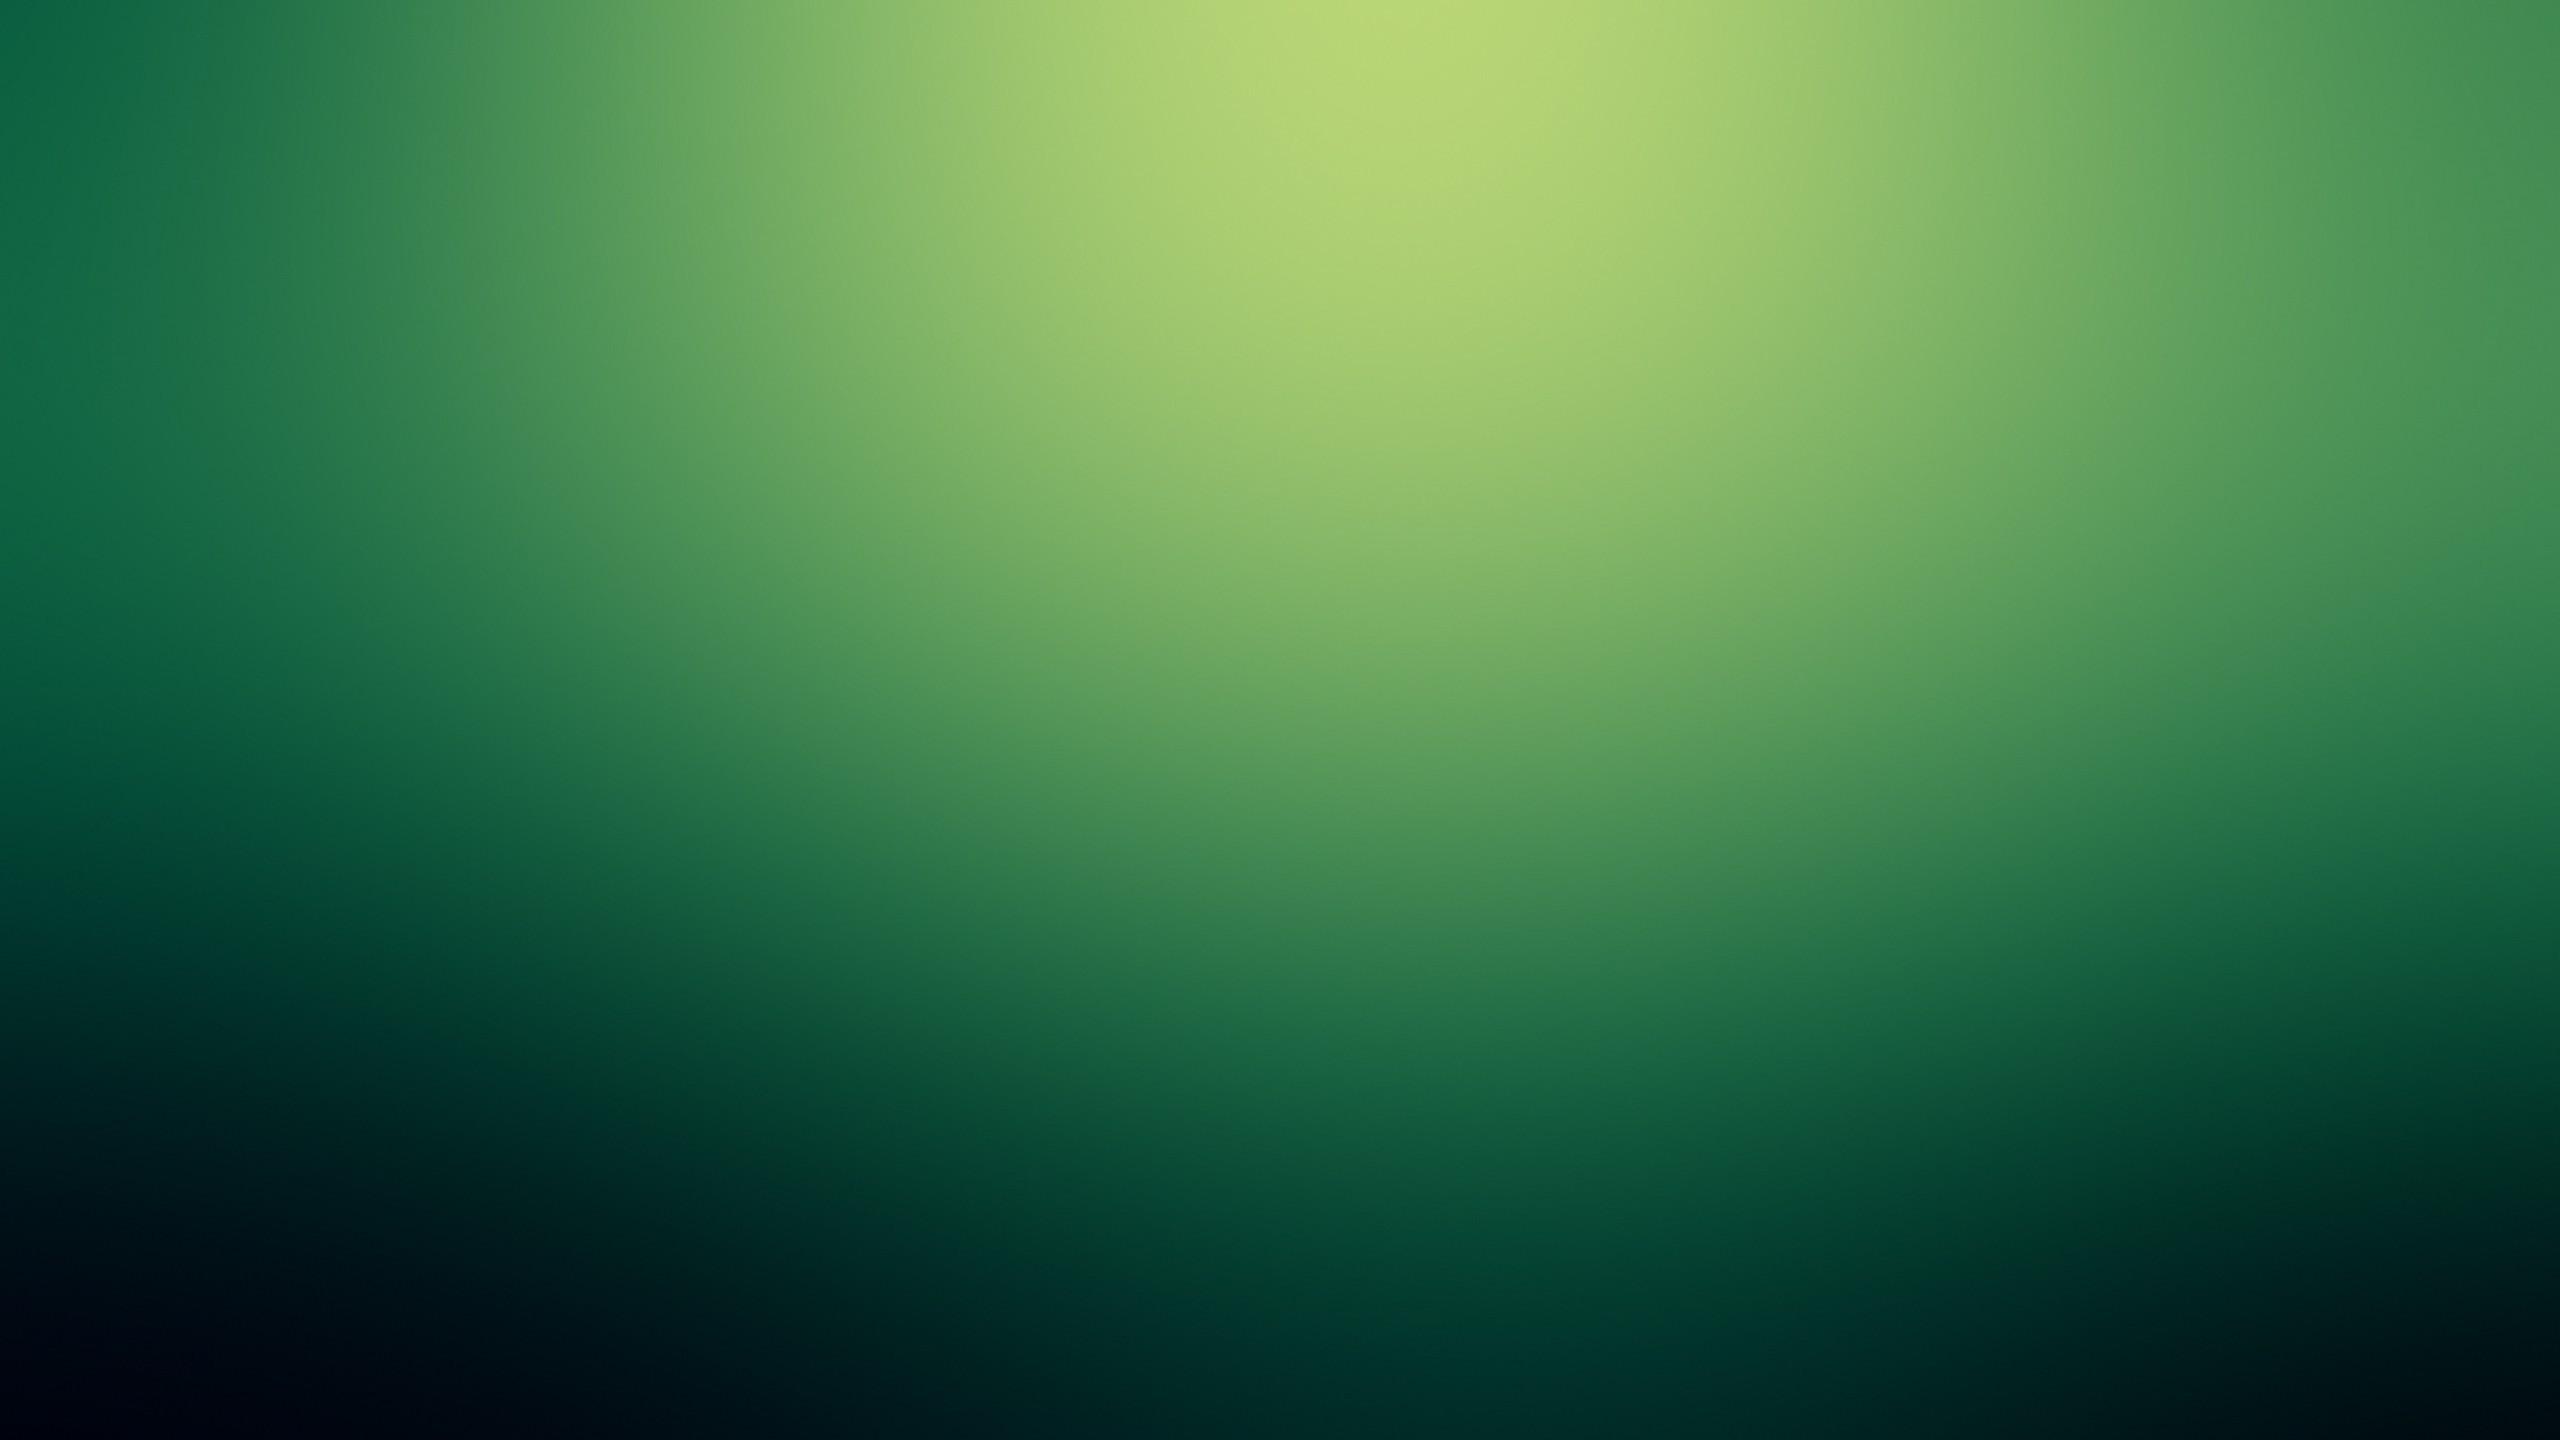 Green Clean Gradient Background Image HD Stock Illustration